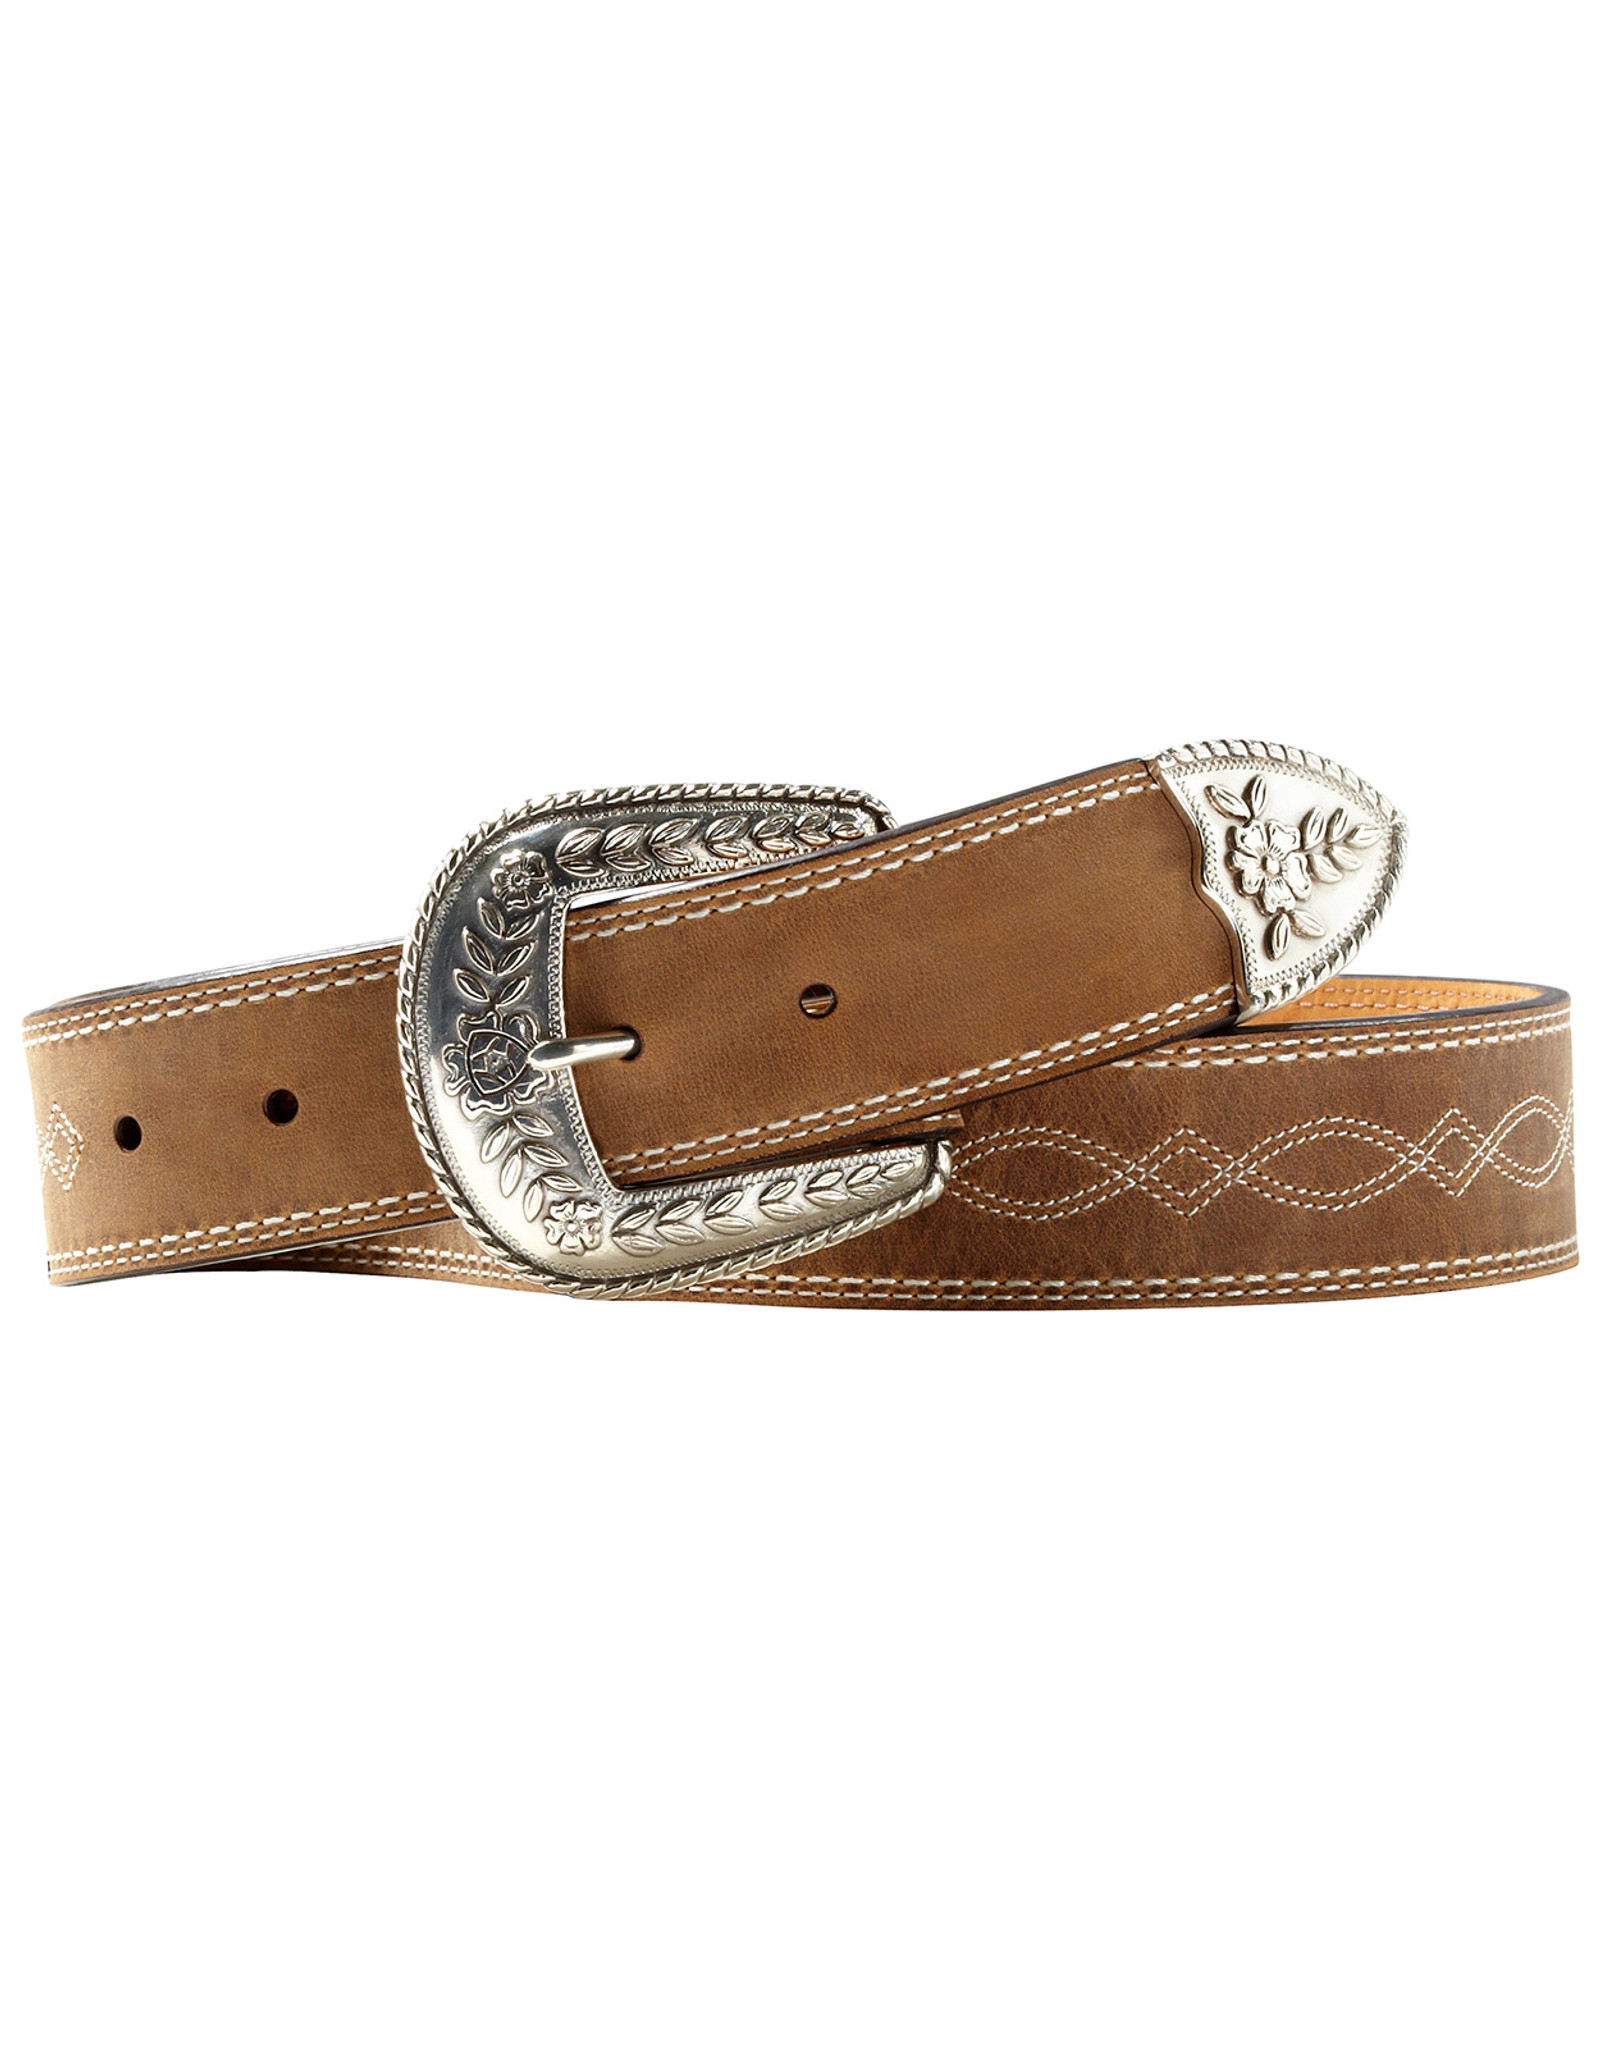 Belts Collection for Women